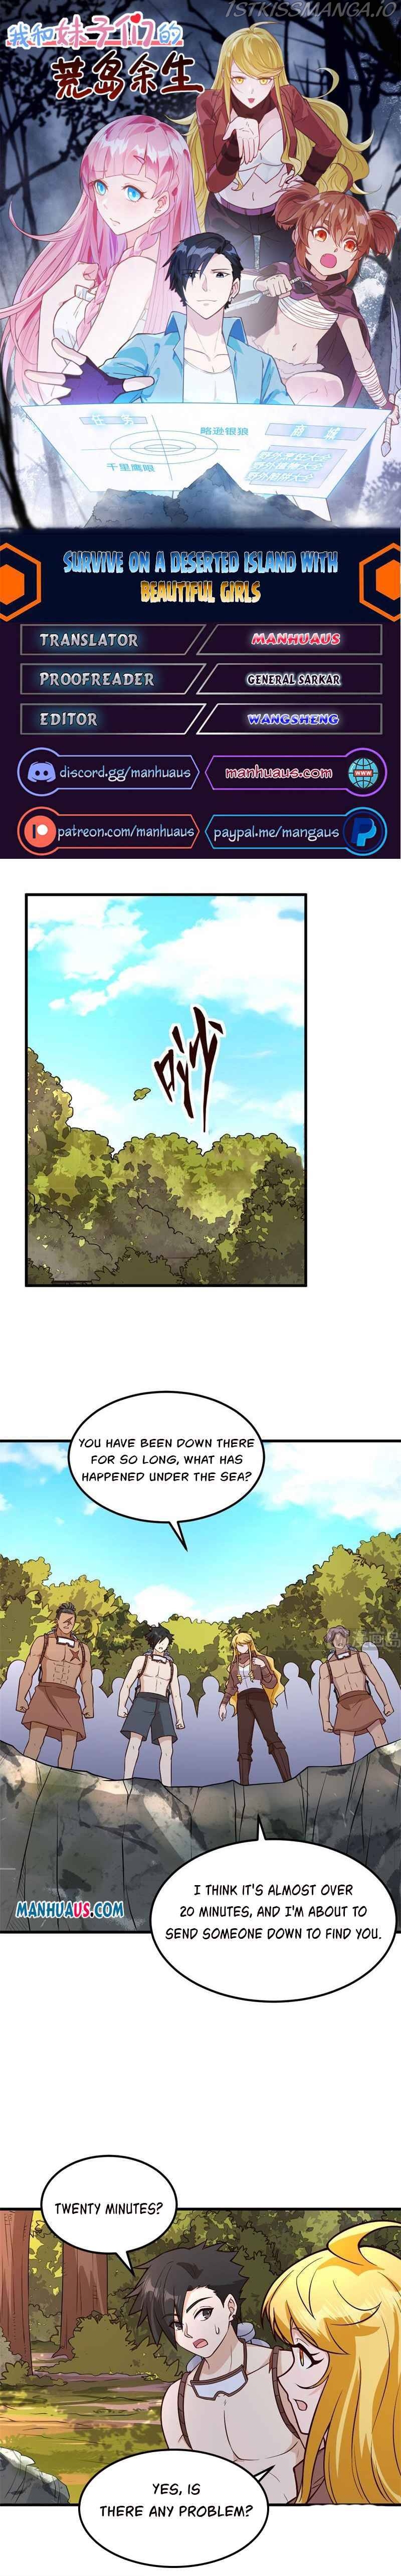 Survive On A Deserted Island With Beautiful Girls - Page 1